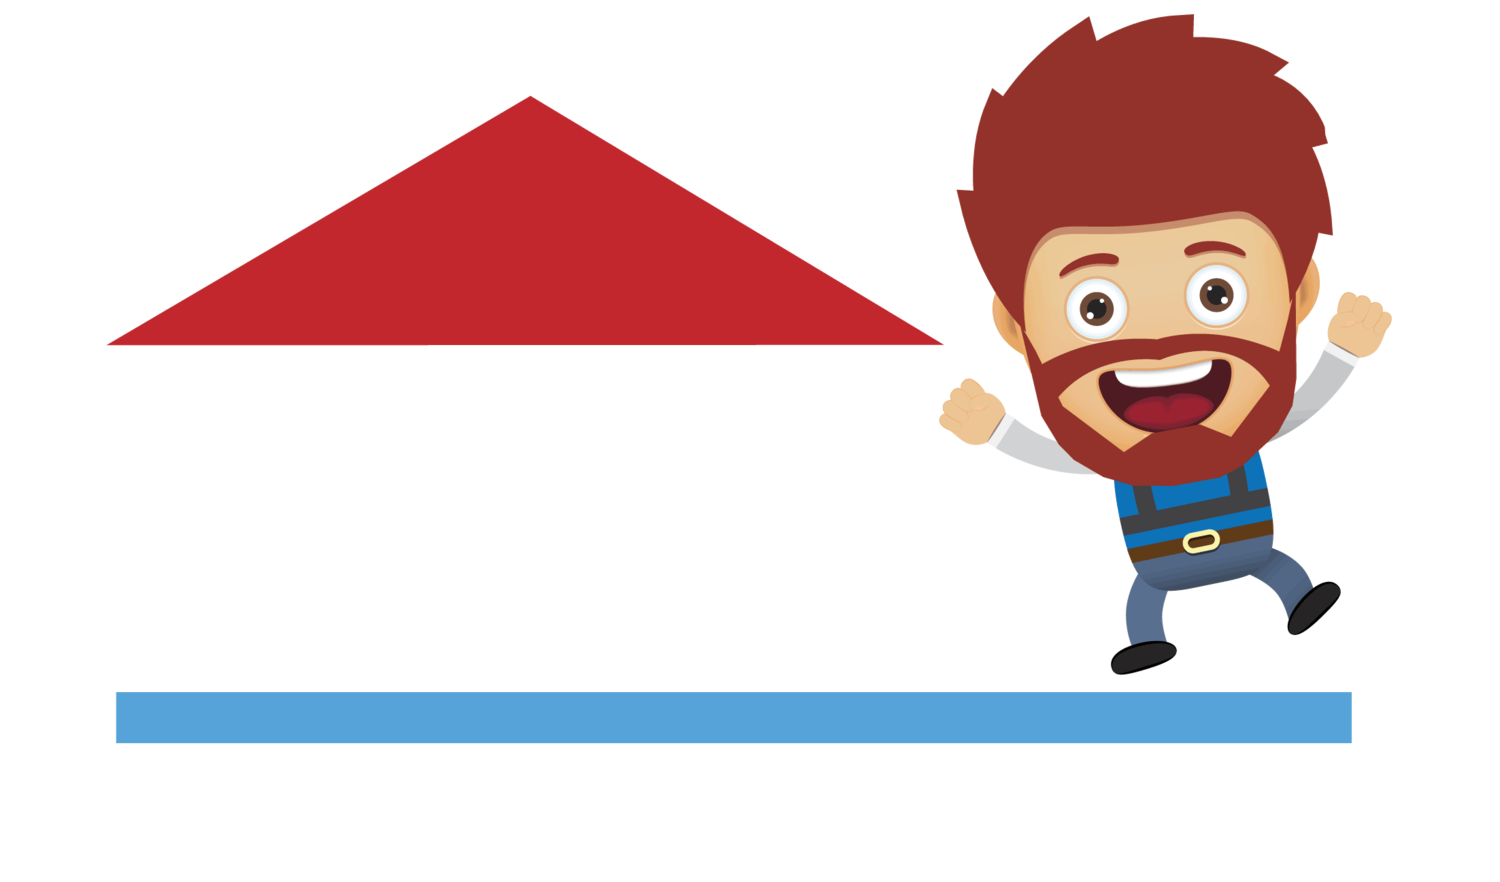 Big Red Buys Houses